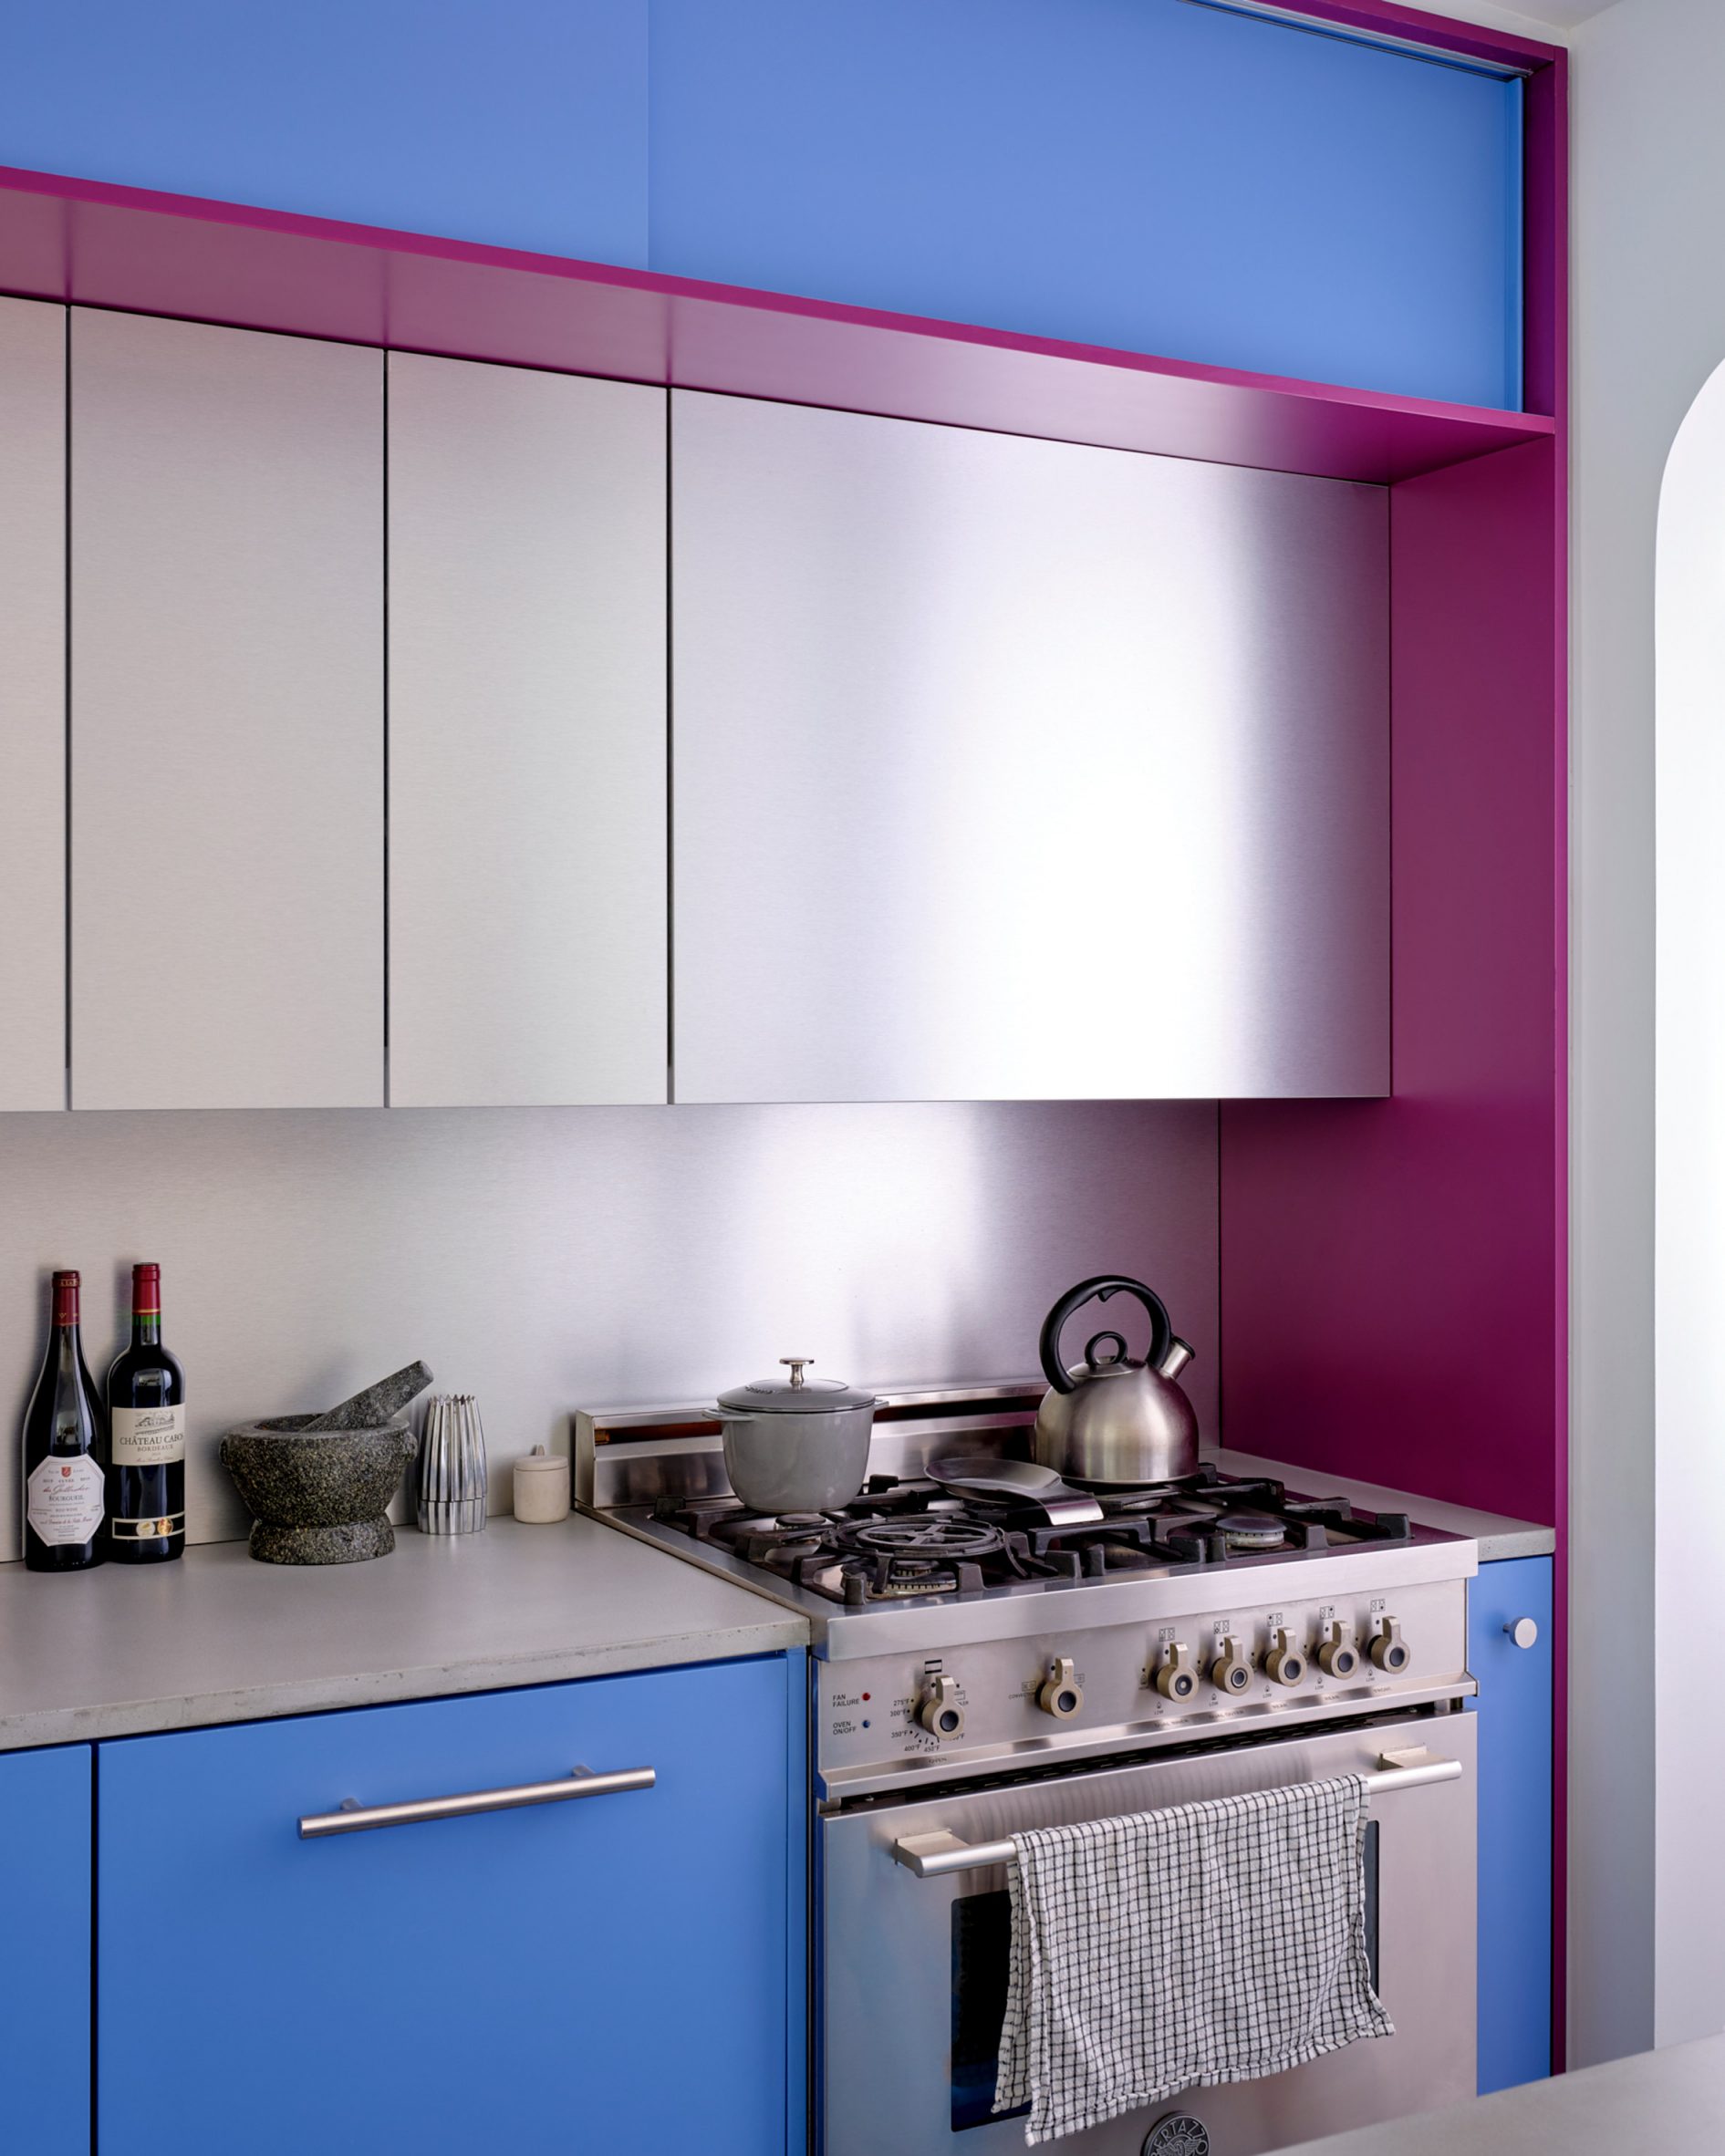 Raspberry and periwinkle cabinets surrounding a cooking area, which also features aluminium panels